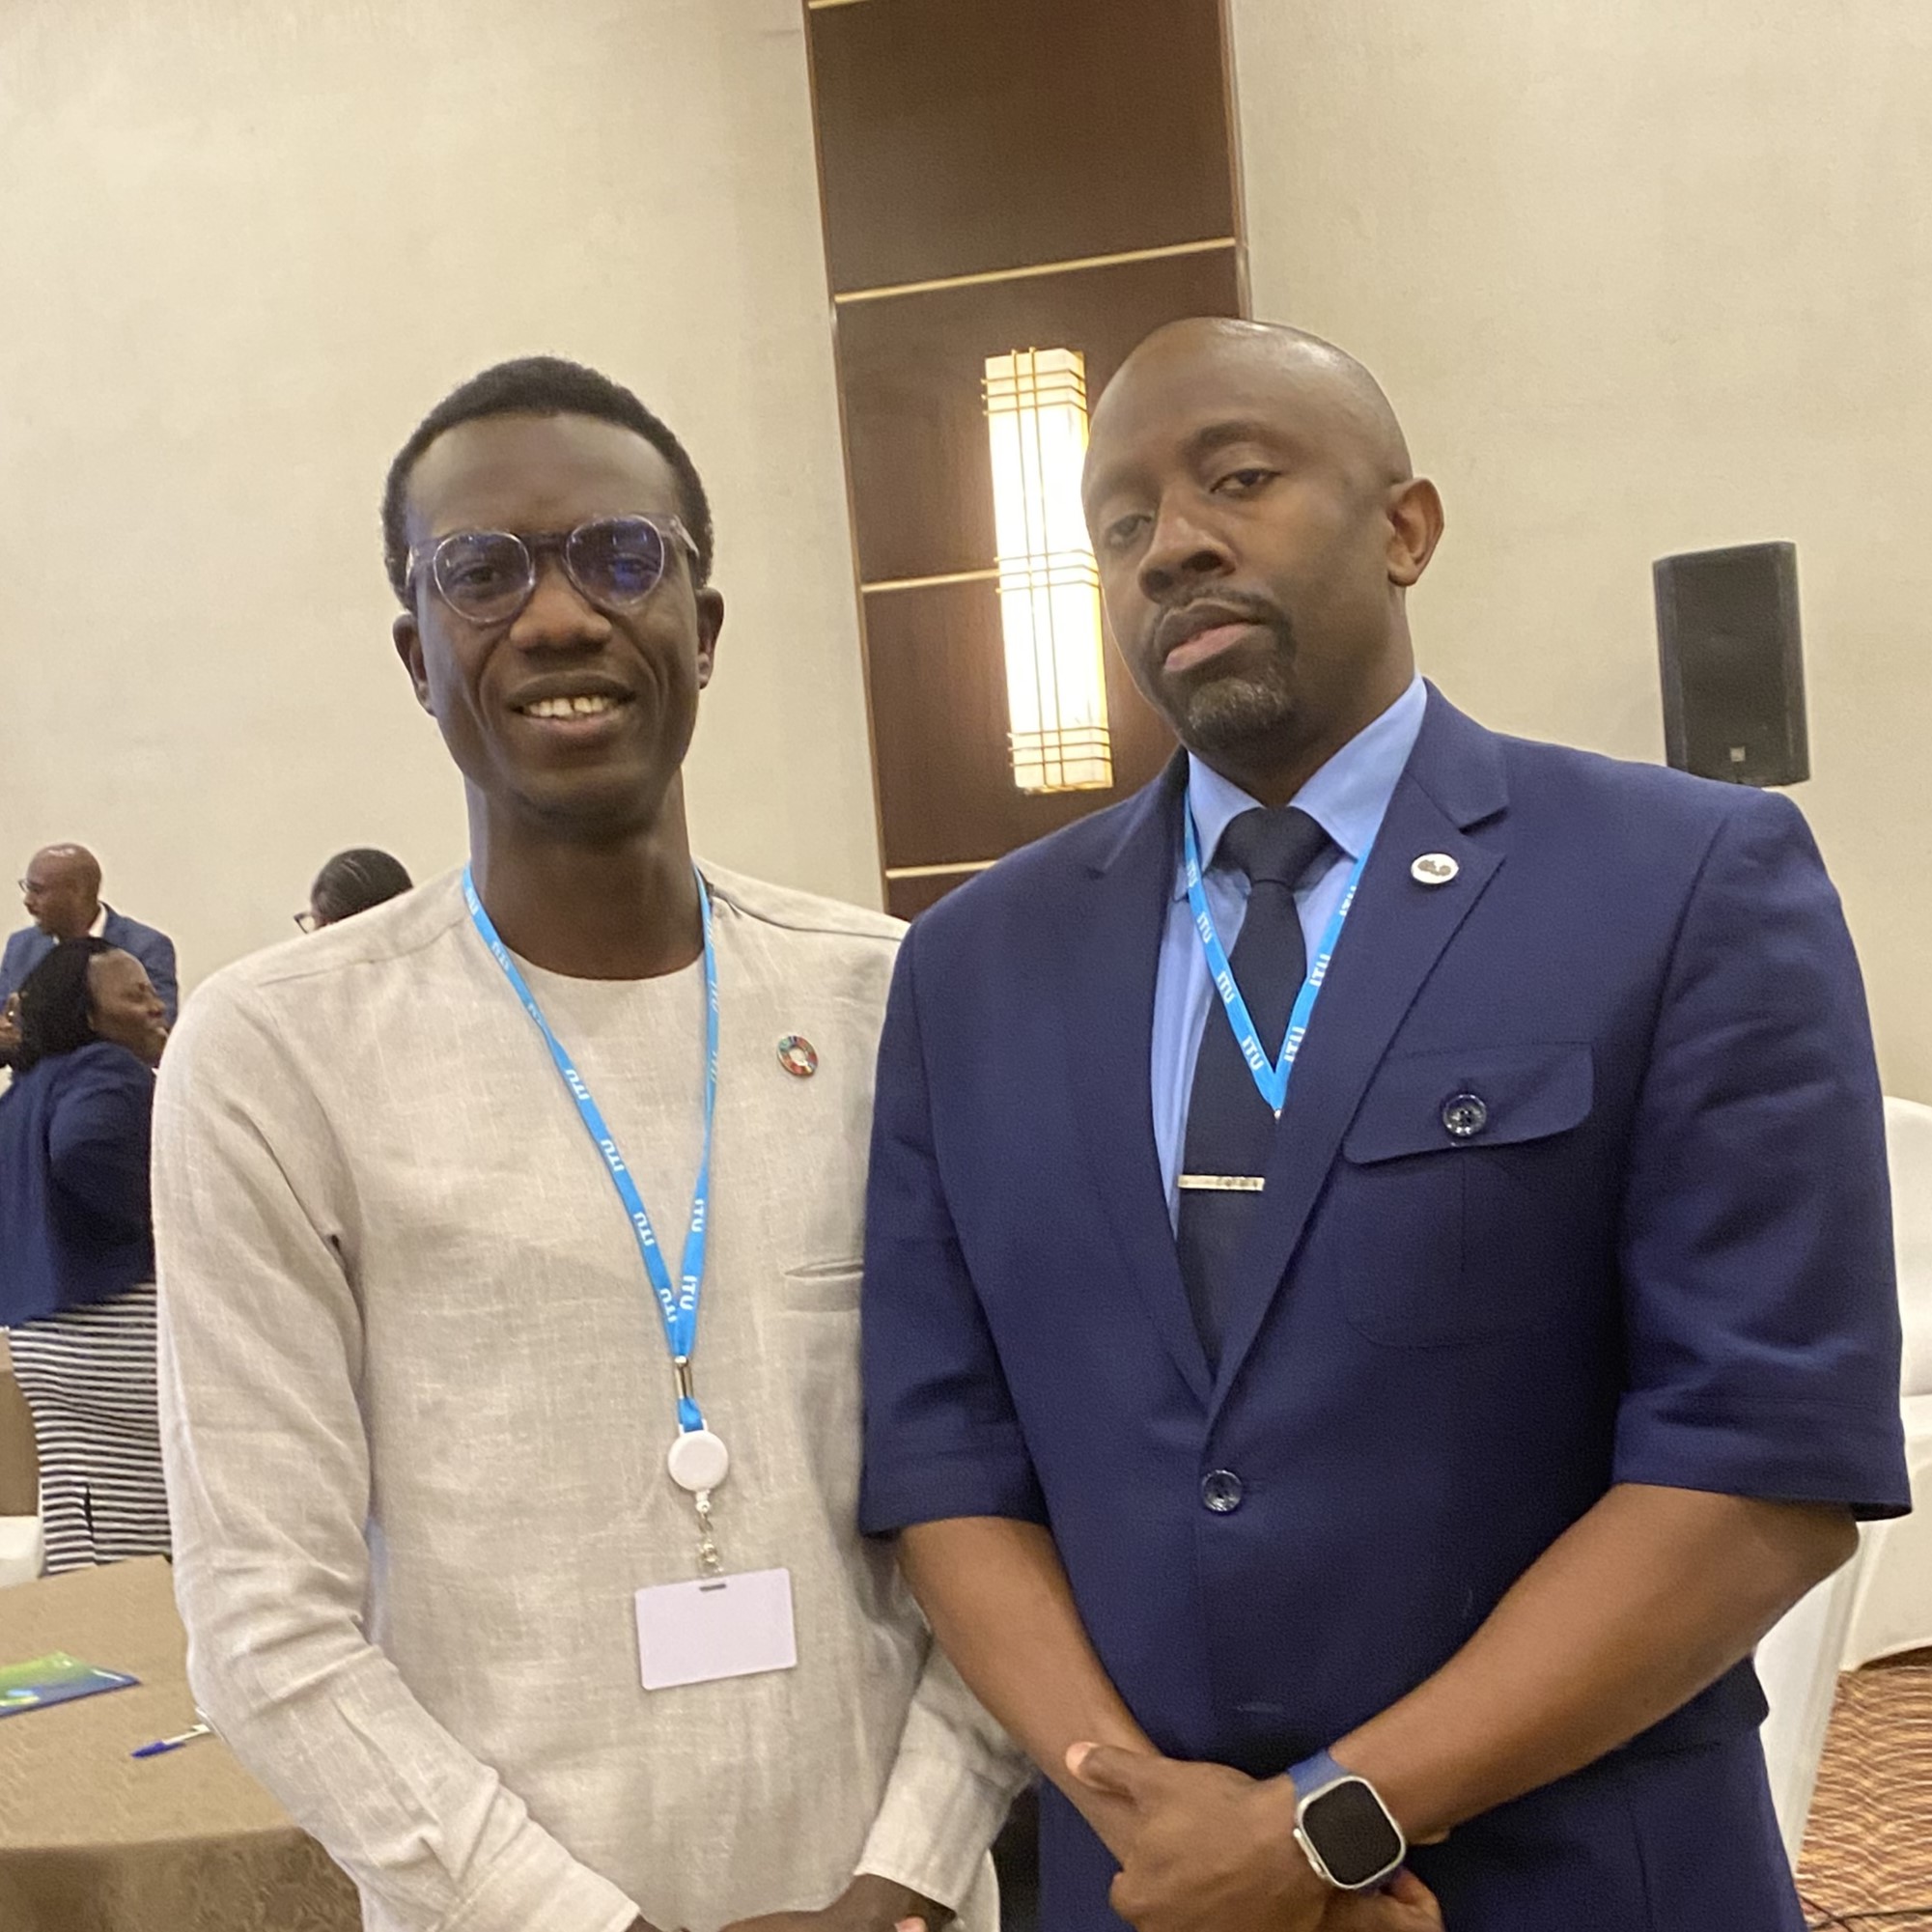 Two African men. On the left a younger one in a beige top with an SDGs badge. On the right, an older one in a blue suit and tie.